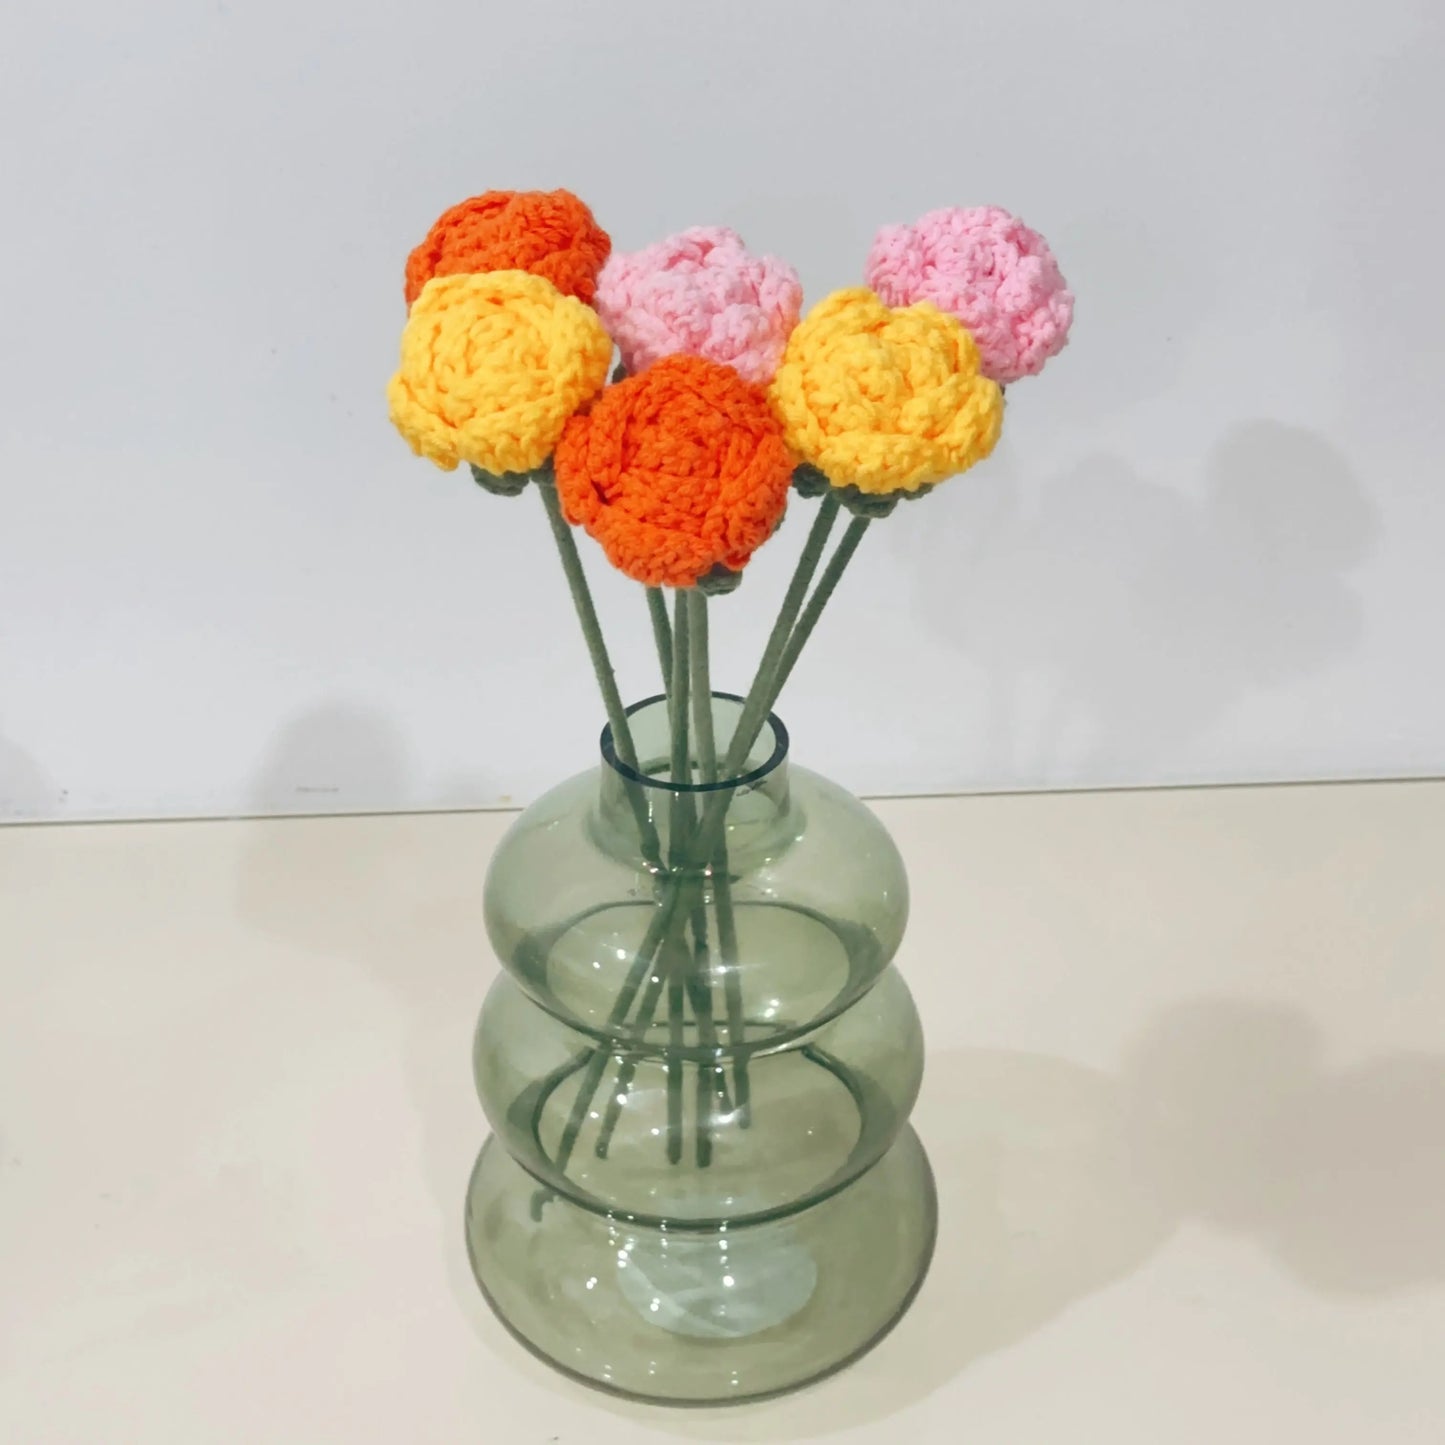 Hand knitted Woolen Small Roses Sunday's Creative